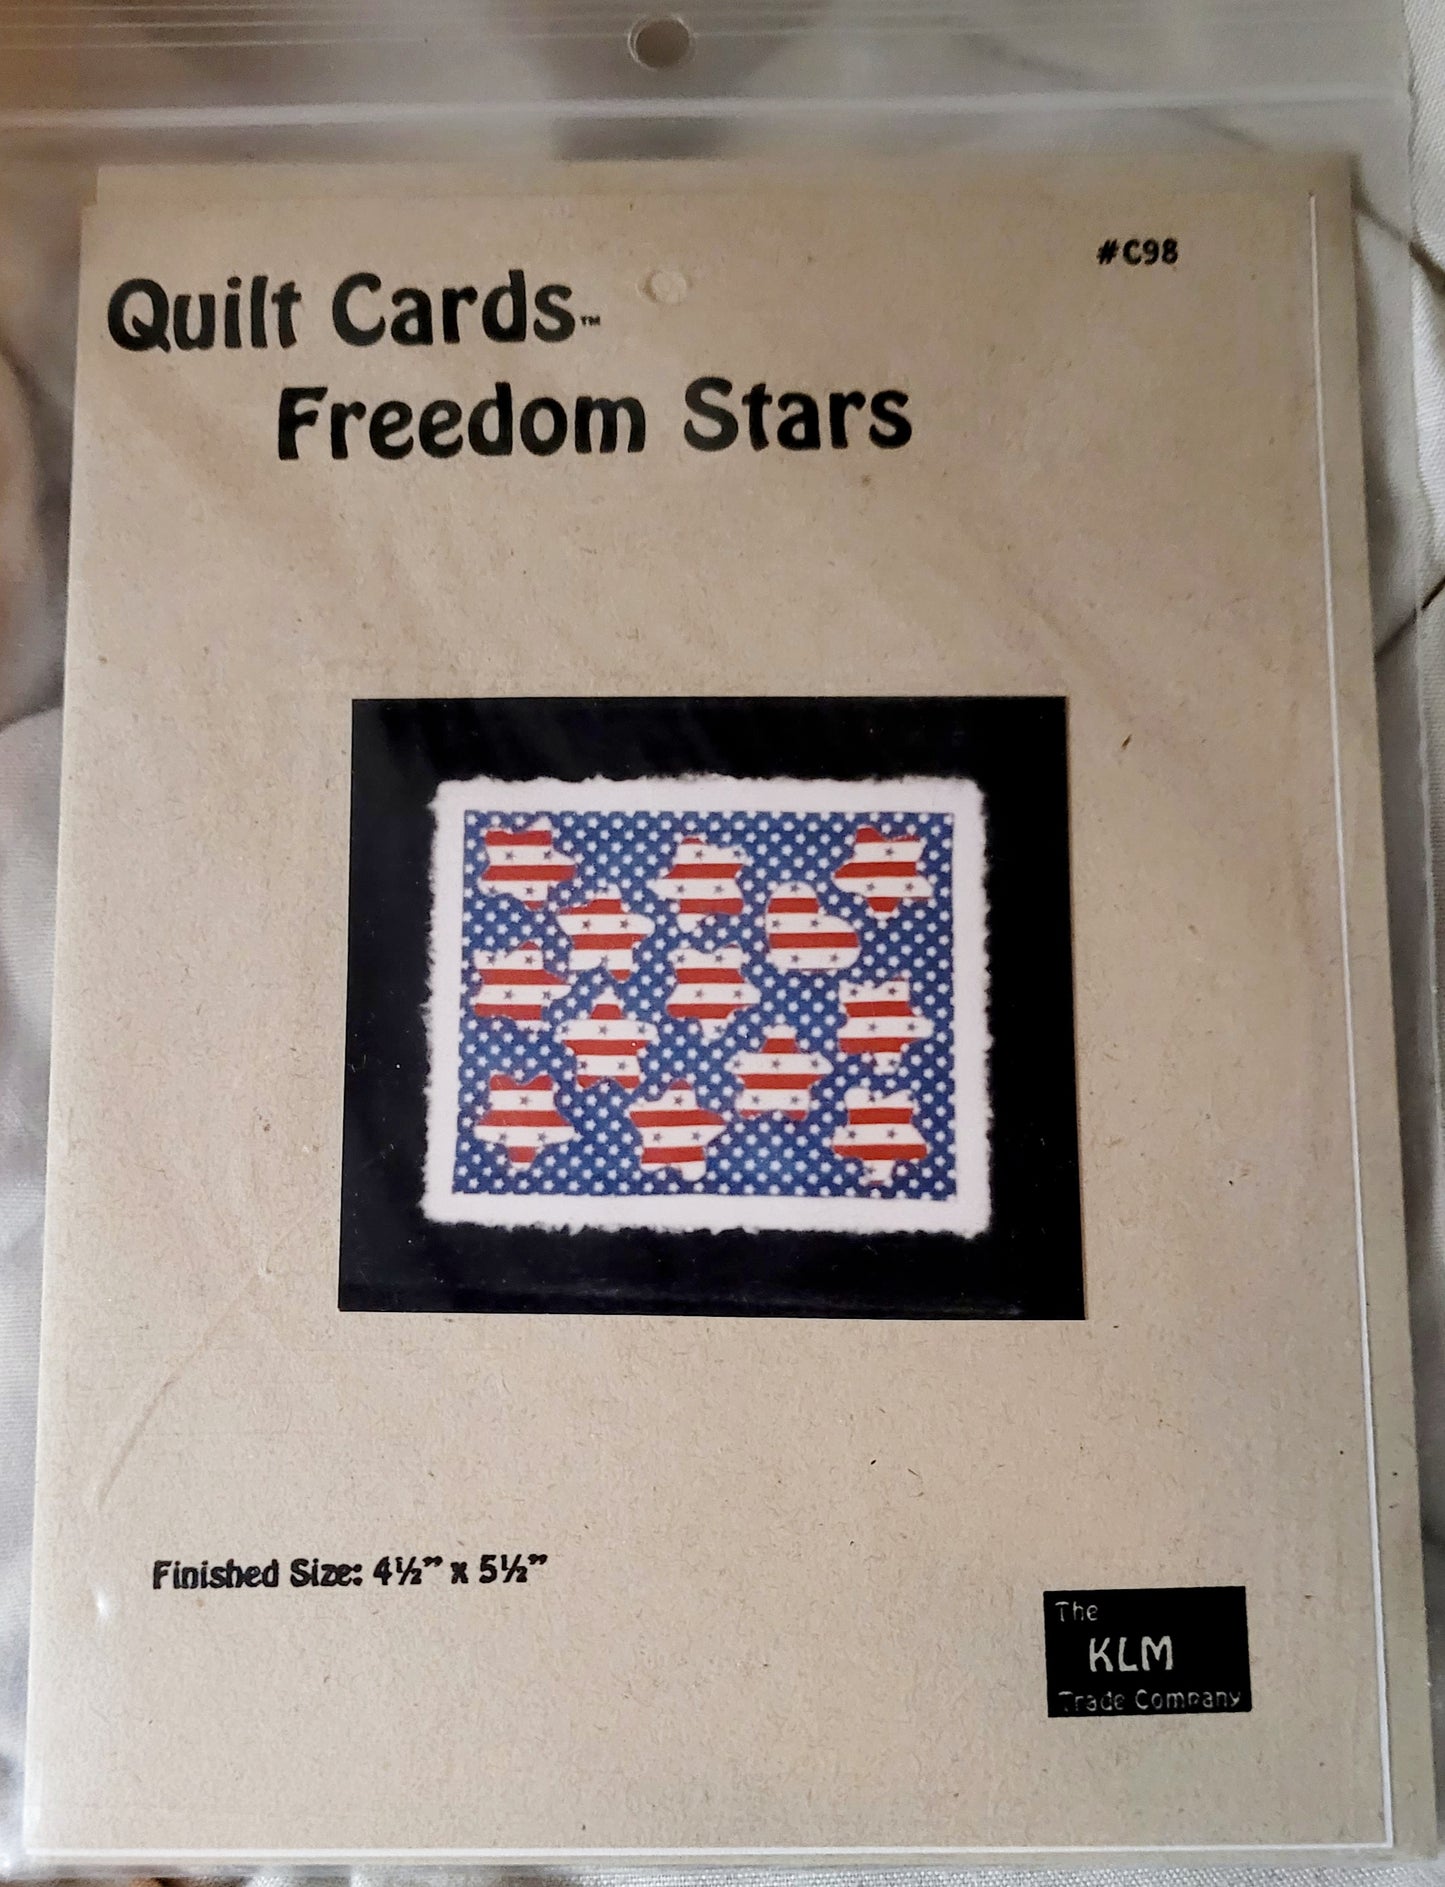 "Freedom Stars" #C98 Quilt Cards by KLM Trading Co. *BRAND NEW